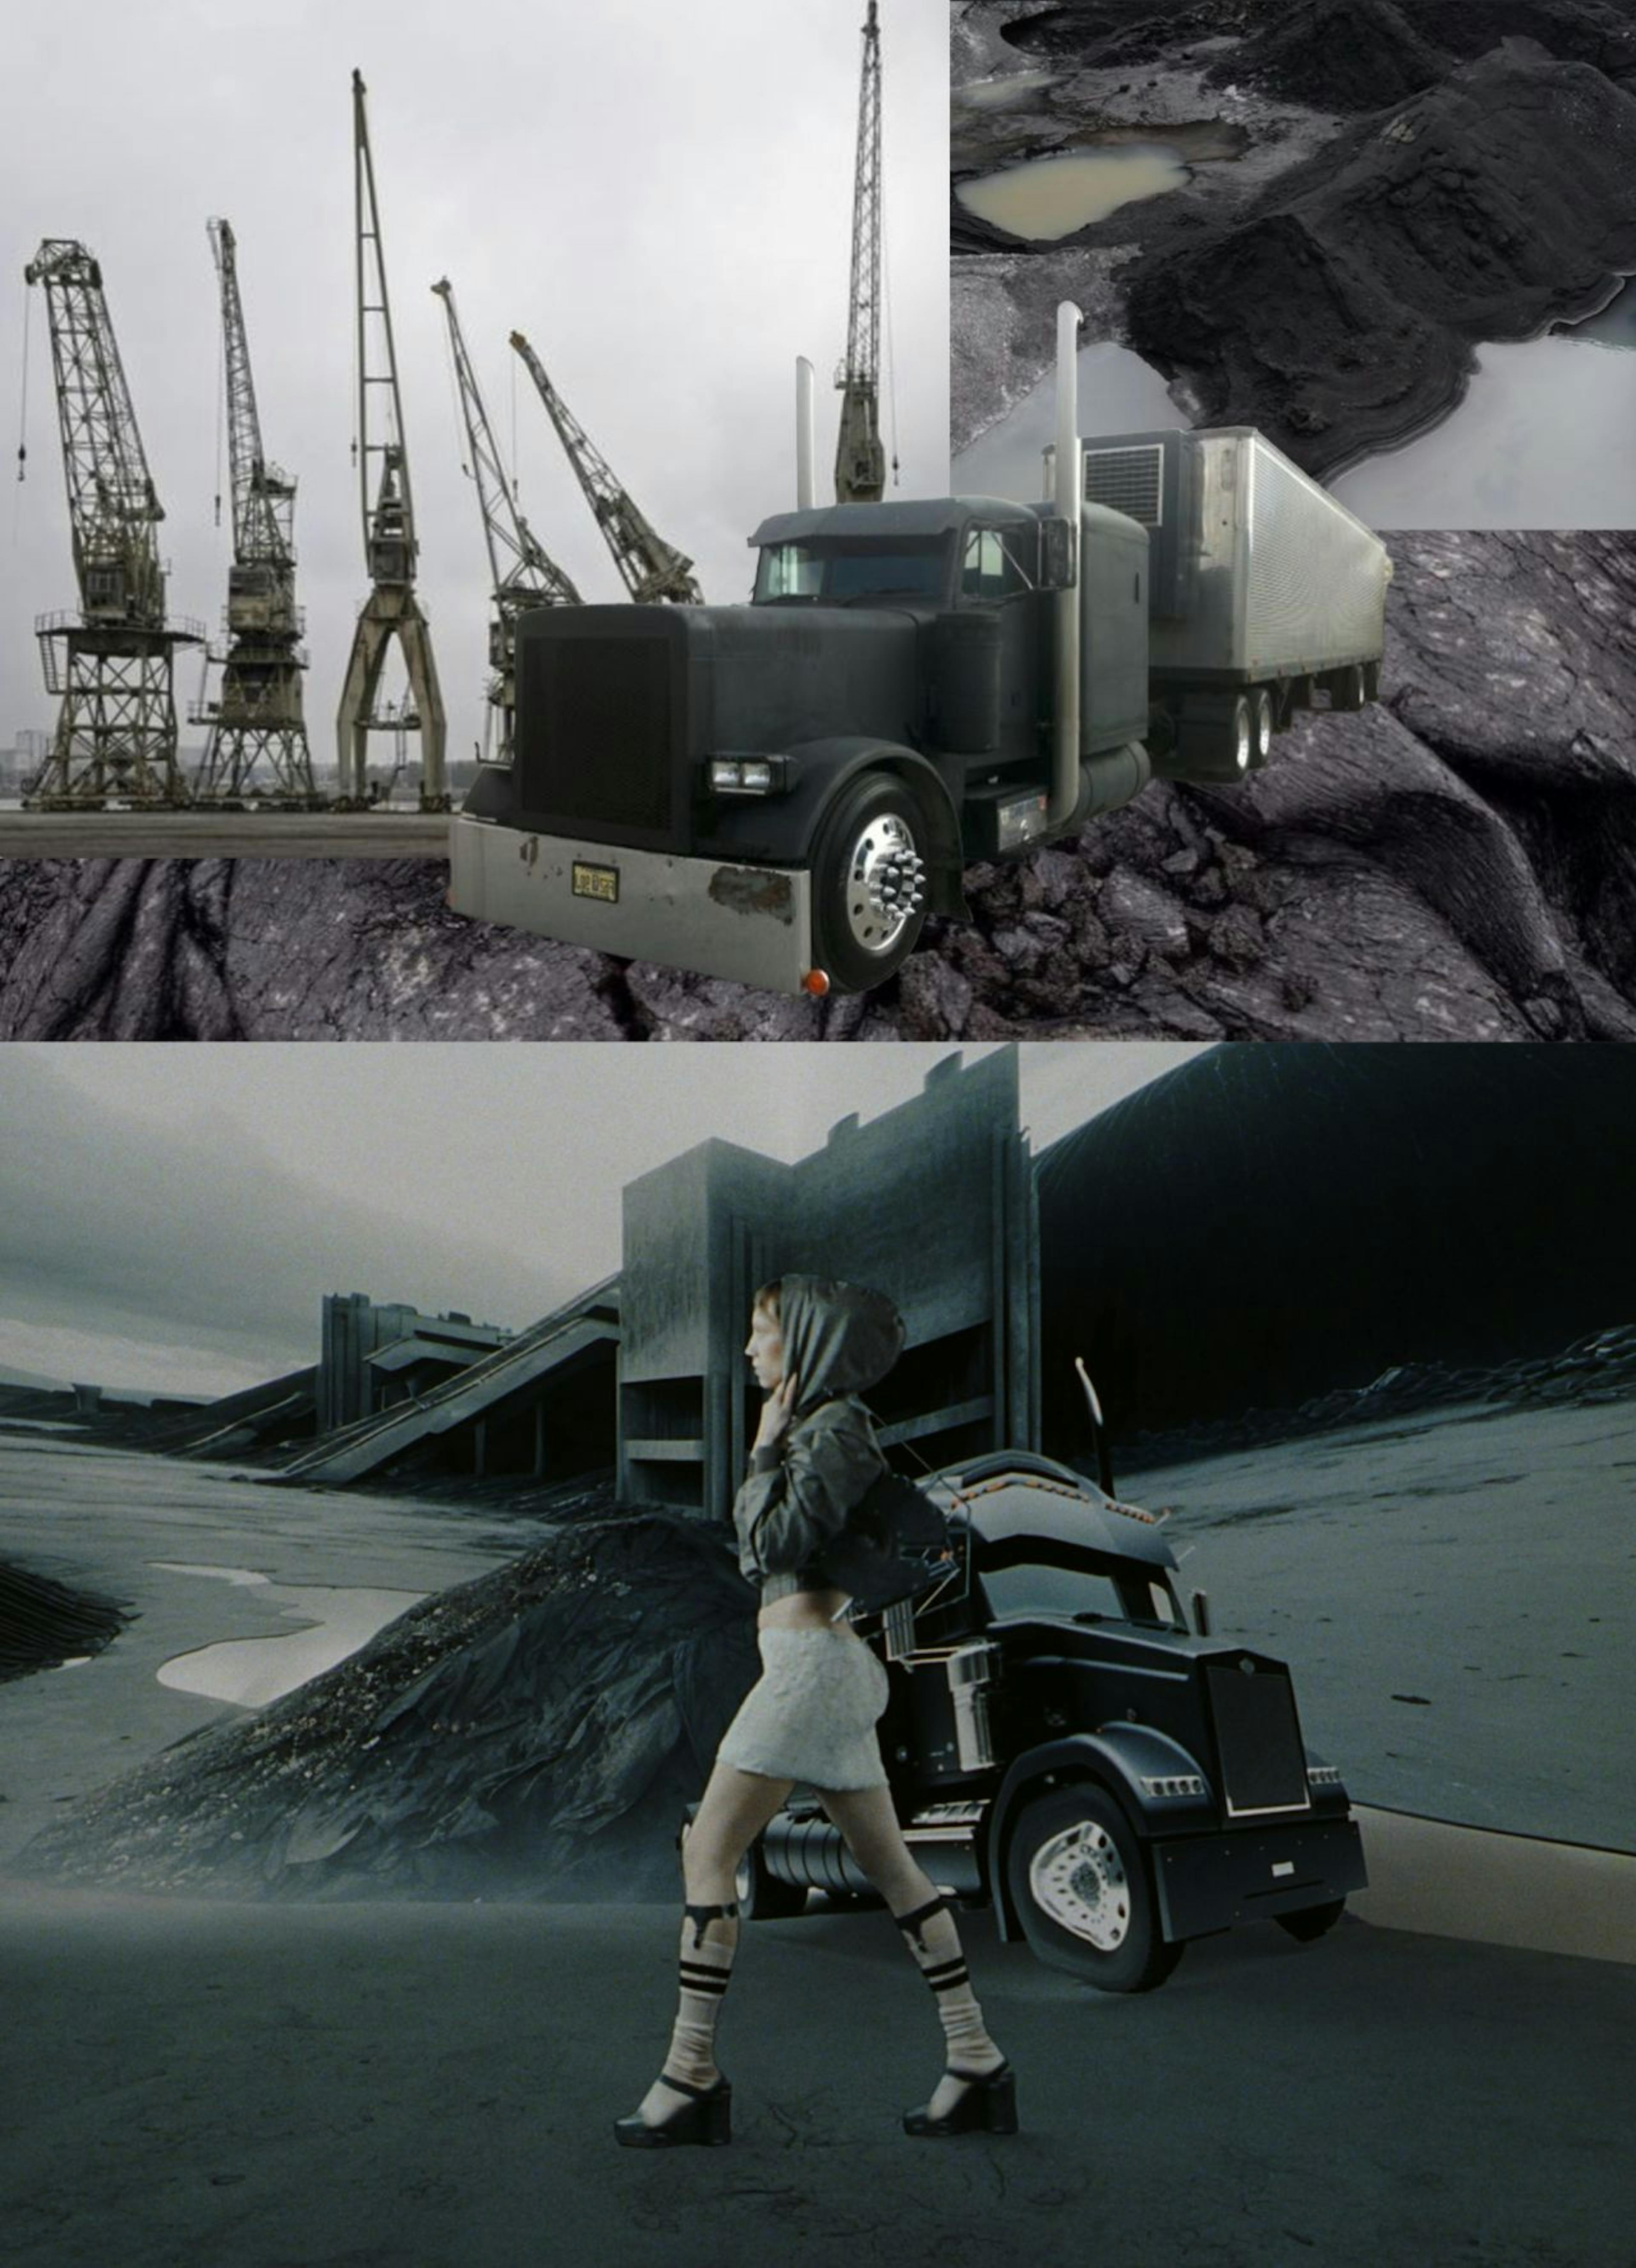 This composite image juxtaposes two distinct scenes. In the upper portion, a desolate industrial landscape is depicted, with towering cranes looming over a murky, oil-slicked terrain. Below, a solitary figure in modern attire strides confidently past a parked semi-truck that appears out of place on the barren, grey ground that stretches to a stark, industrial building in the background.